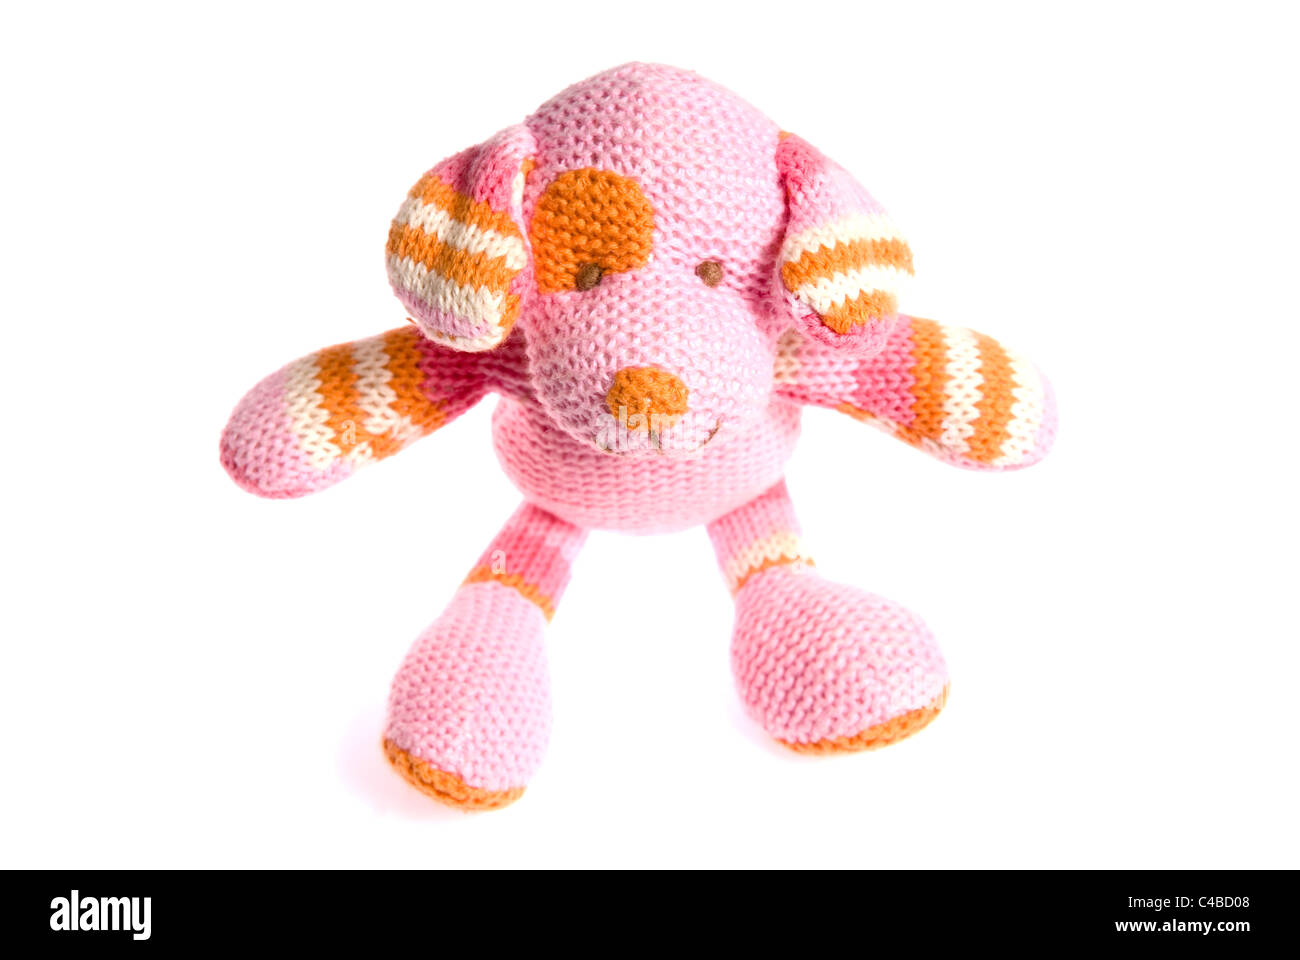 Pink and orange soft cuddly plush toy dog isolated on a white background for cutout or space for text Stock Photo